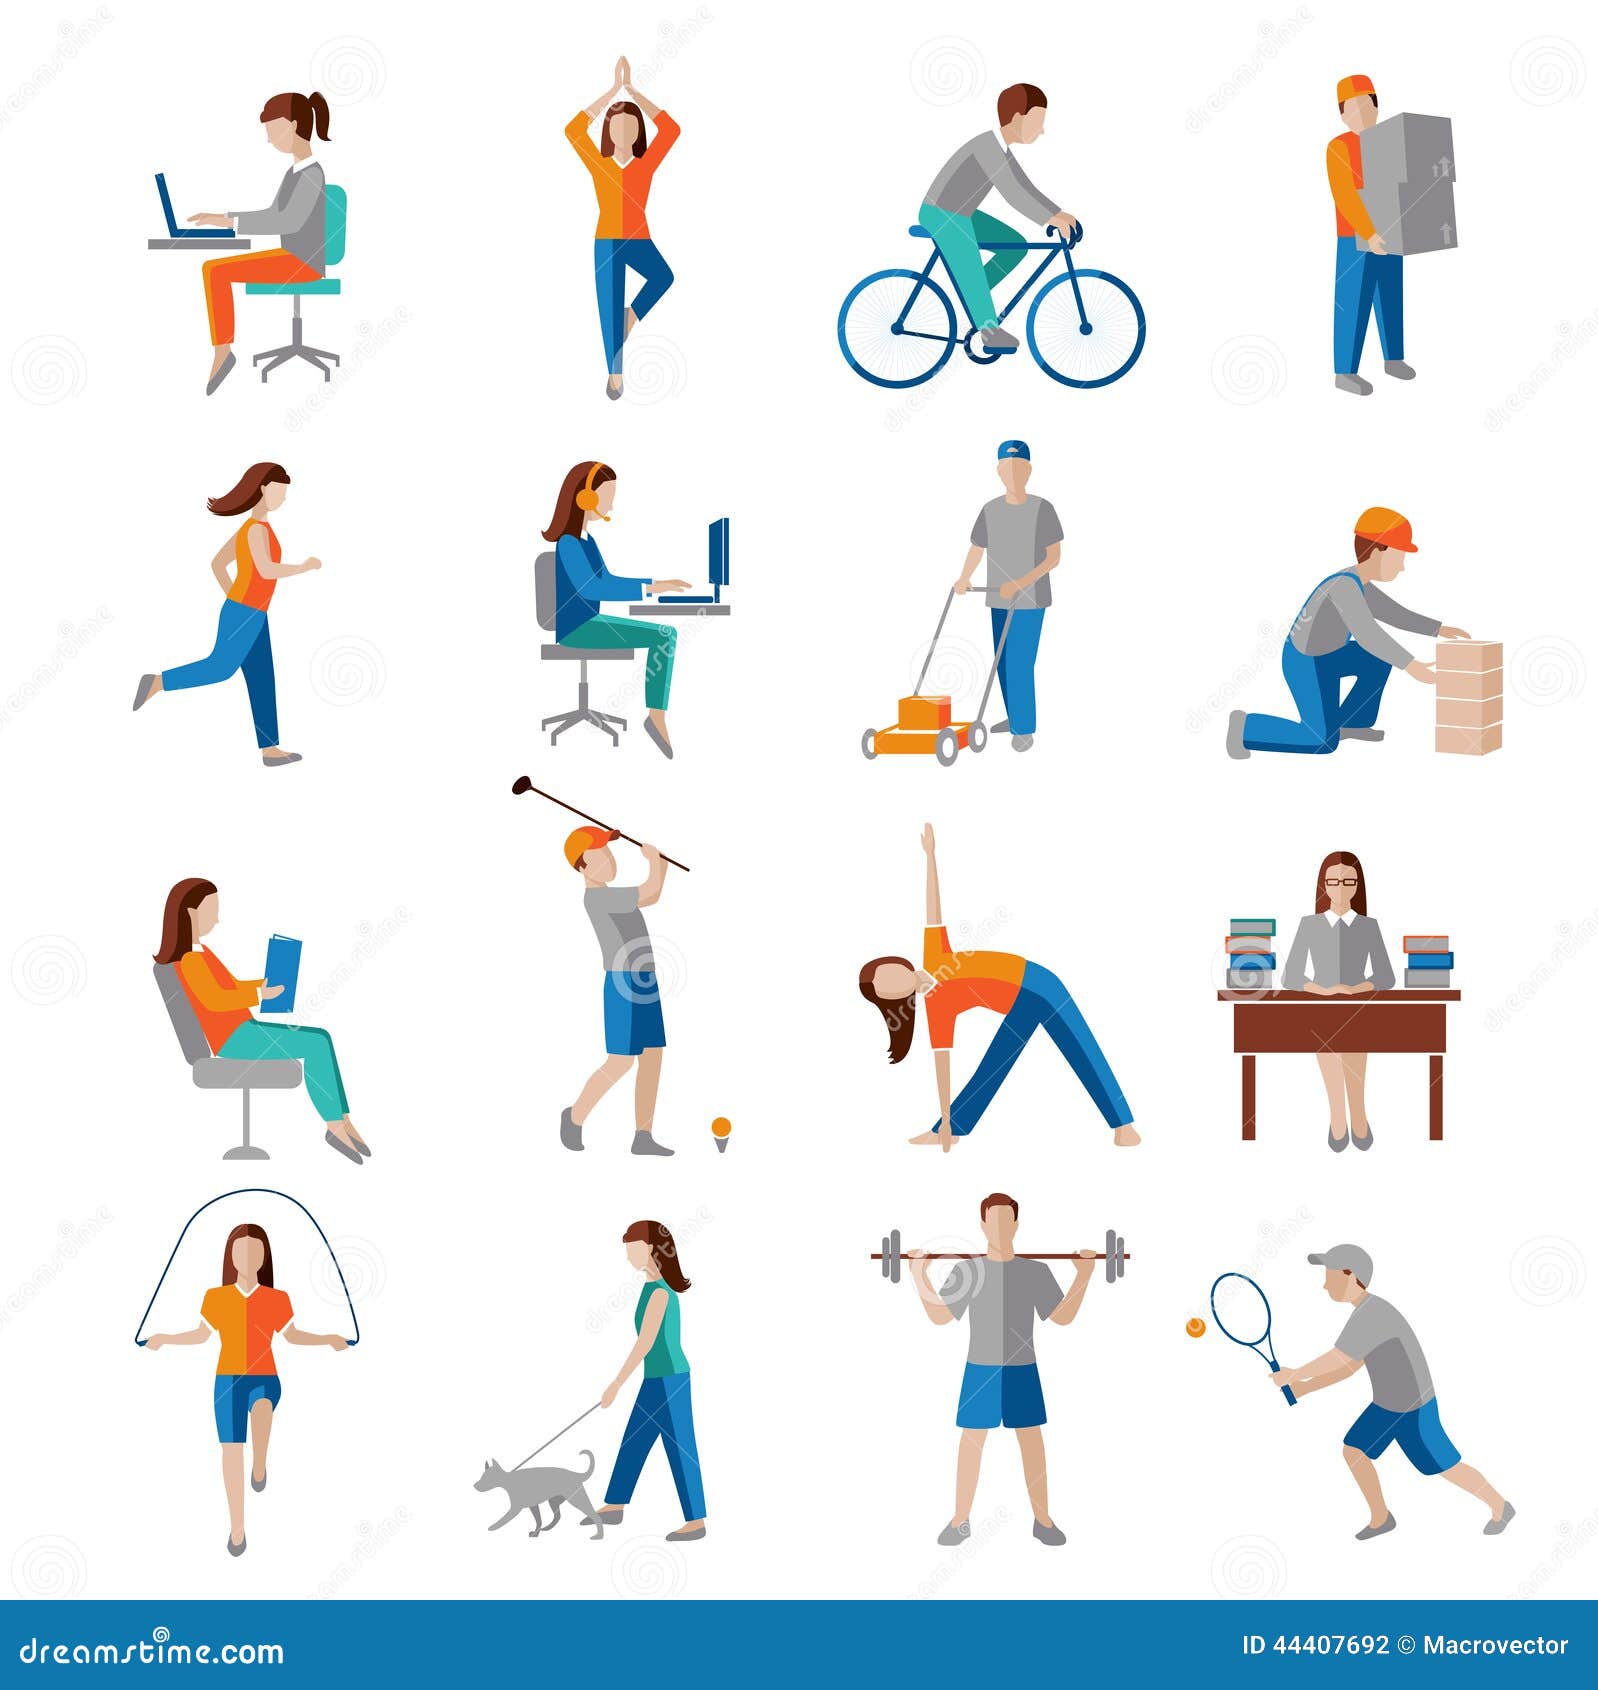 https://thumbs.dreamstime.com/z/physical-activity-icons-healthy-lifestyle-set-isolated-vector-illustration-44407692.jpg